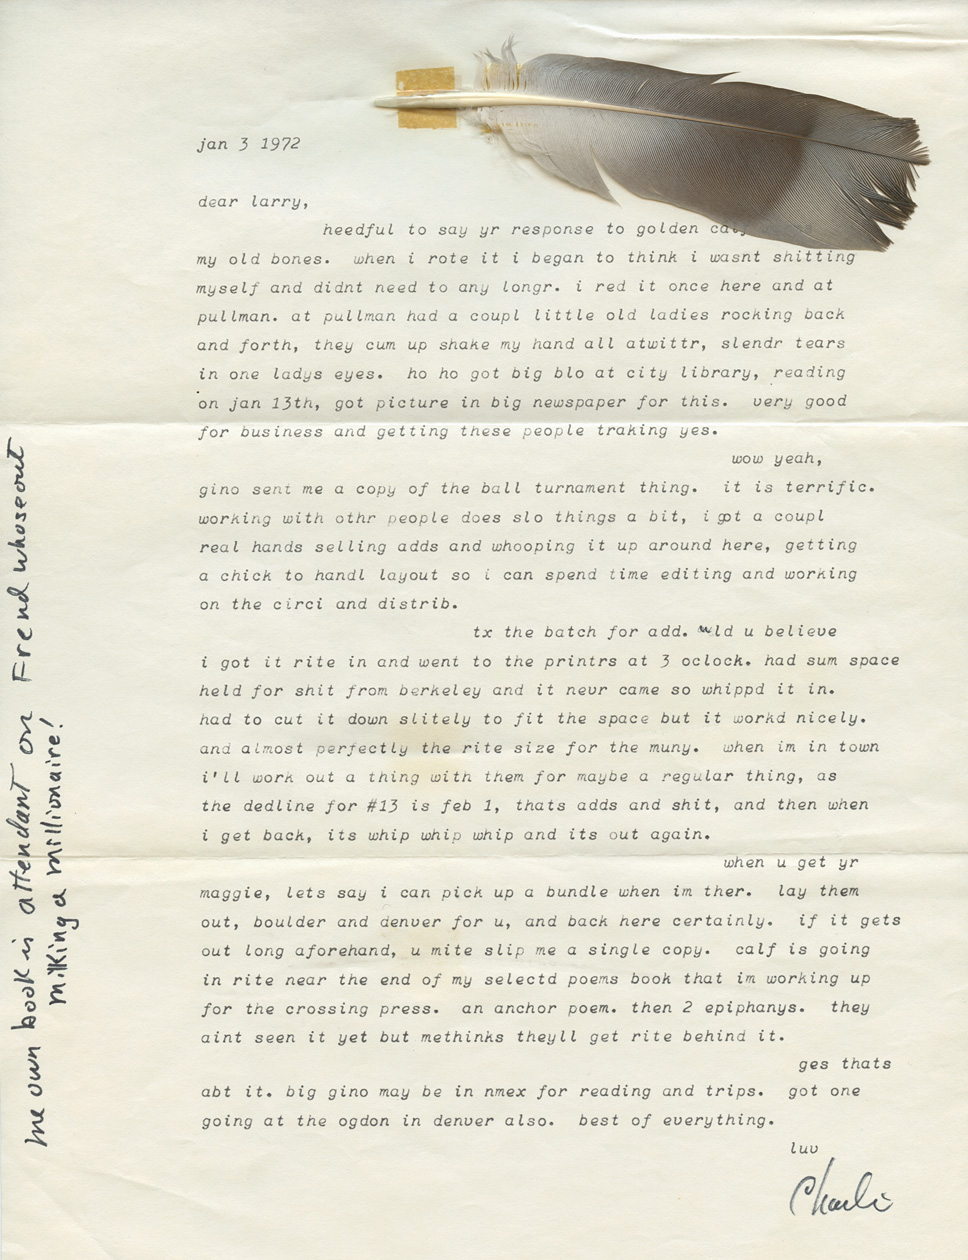 Charles Potts letter, with feather taped on it, to Larry Goodell. January 3, 1972. From the Larry Goodell Archive.